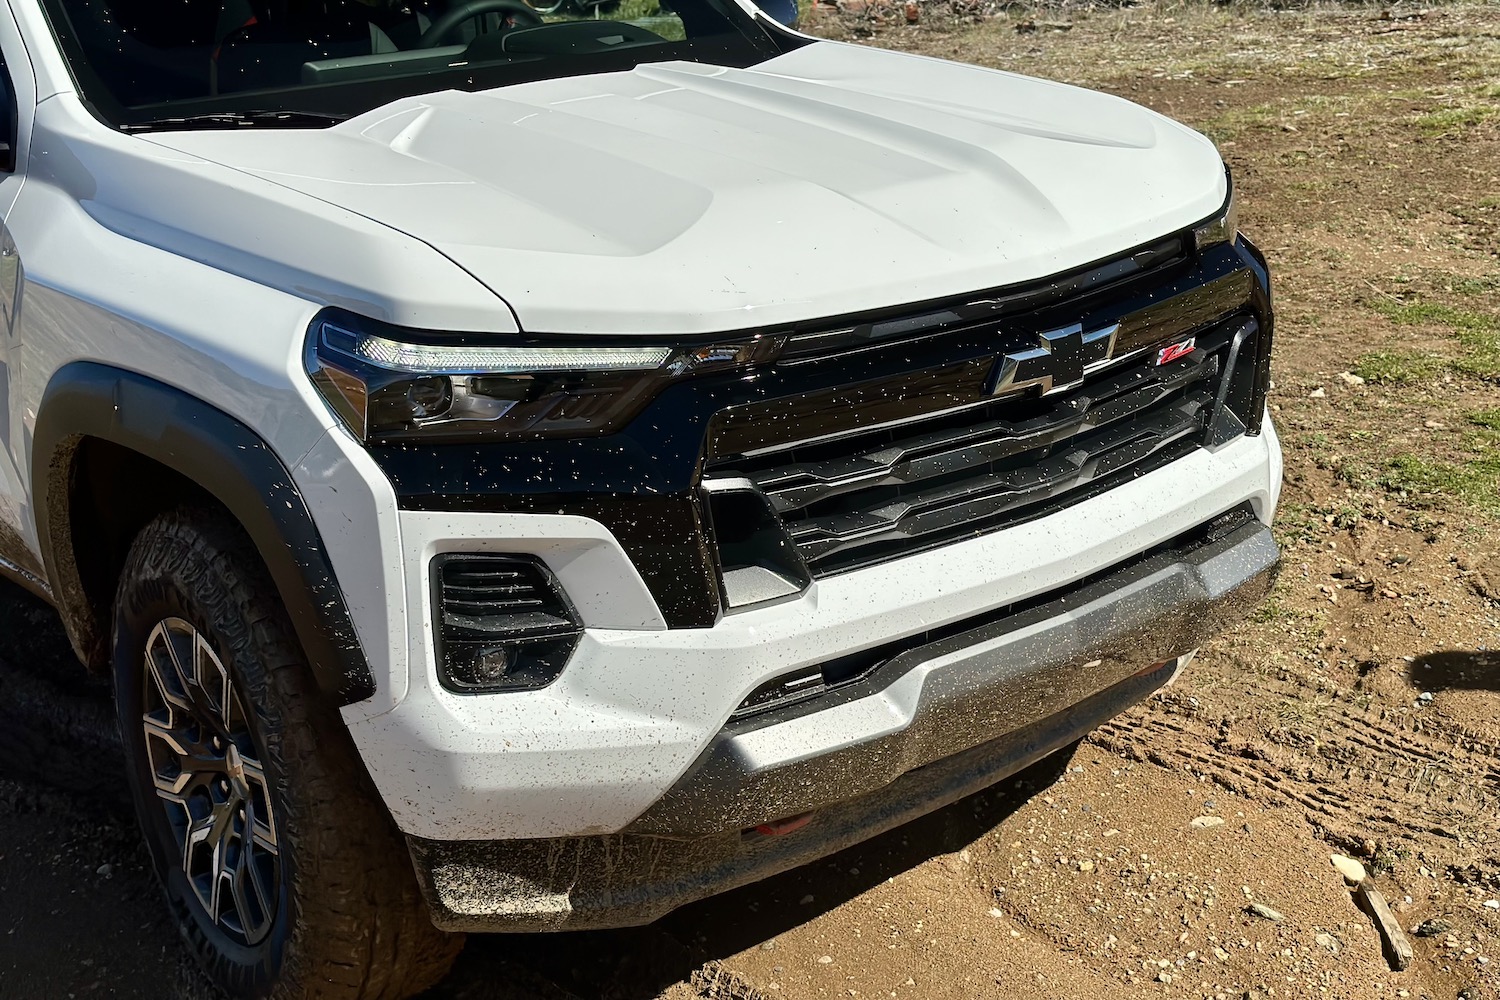 Close up of the front grille and headlights on the 2023 Chevrolet Colorado Z71 parked in a muddy field.